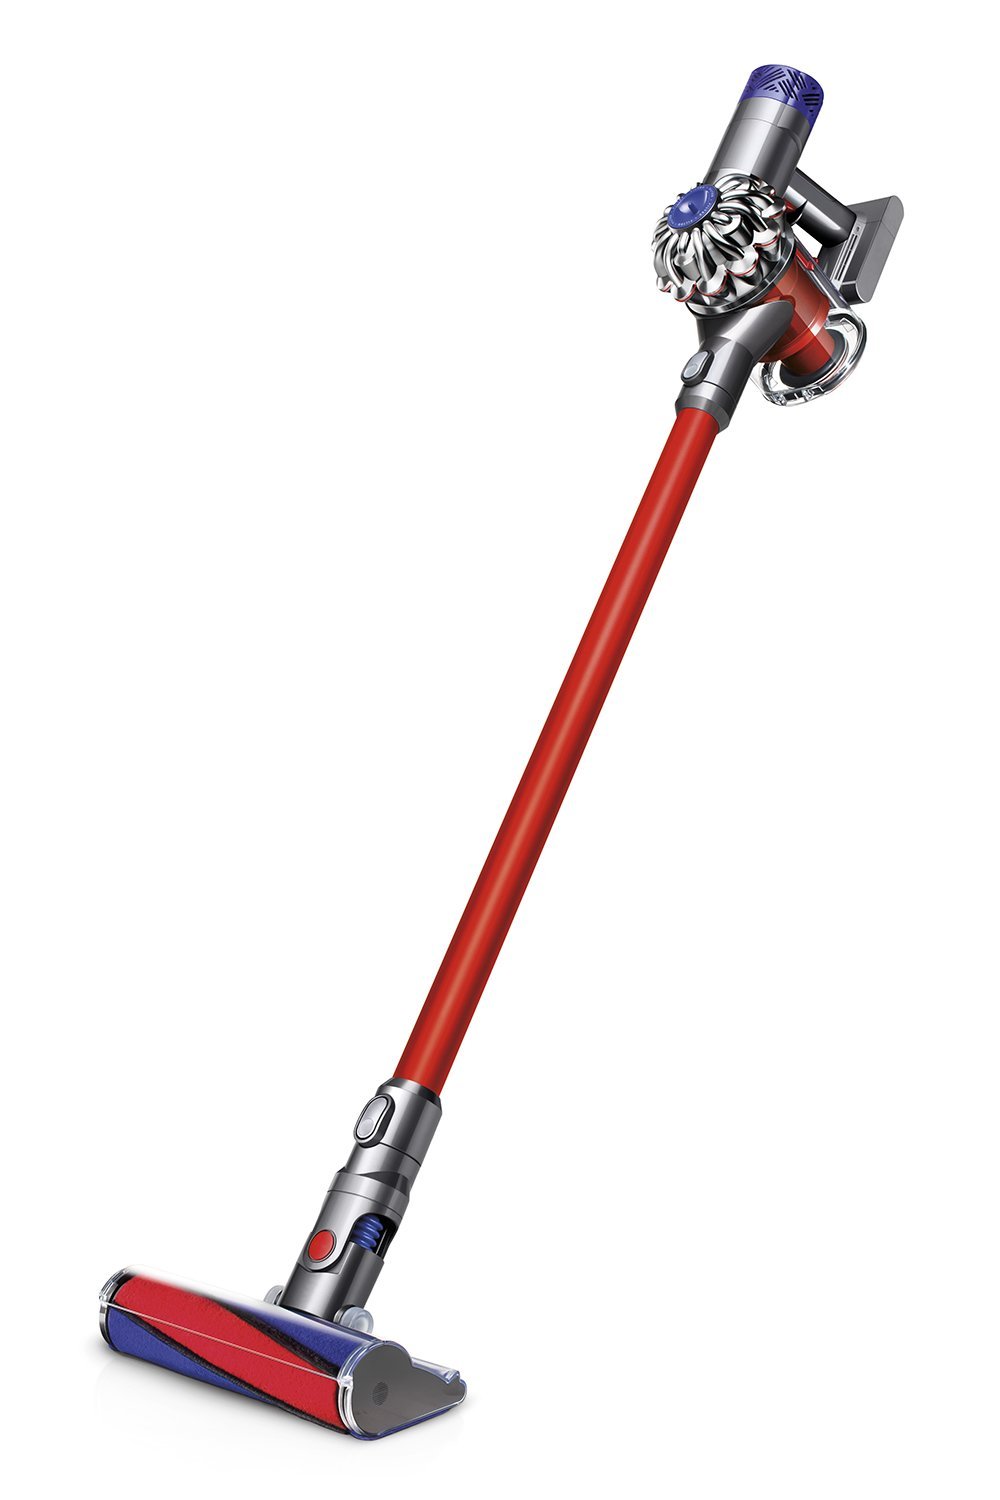 Dyson V6 Absolute Vs Dyson V6 Motorhead All About The Features NerdWallet